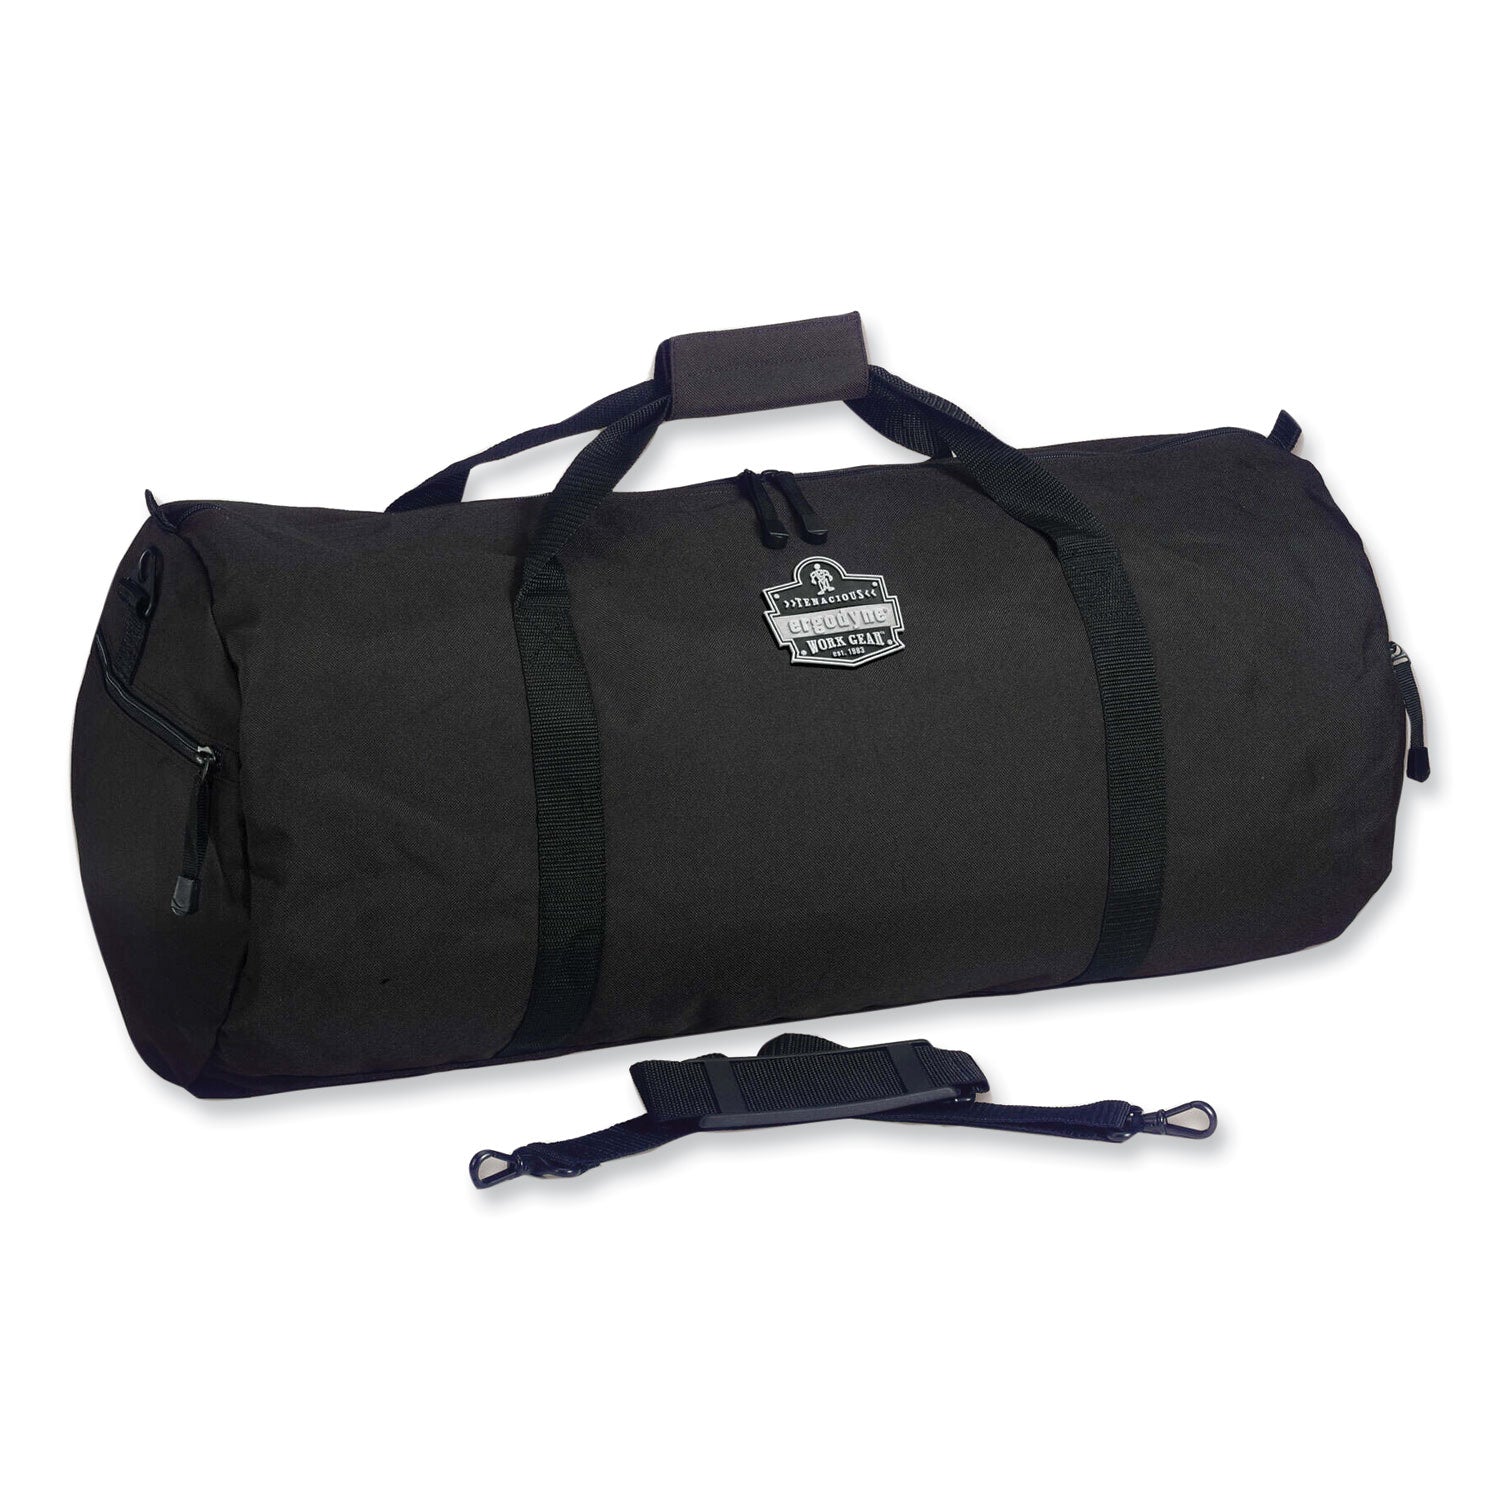 arsenal-5020p-gear-duffel-bag-polyester-small-12-x-23-x-12-black-ships-in-1-3-business-days_ego13320 - 1